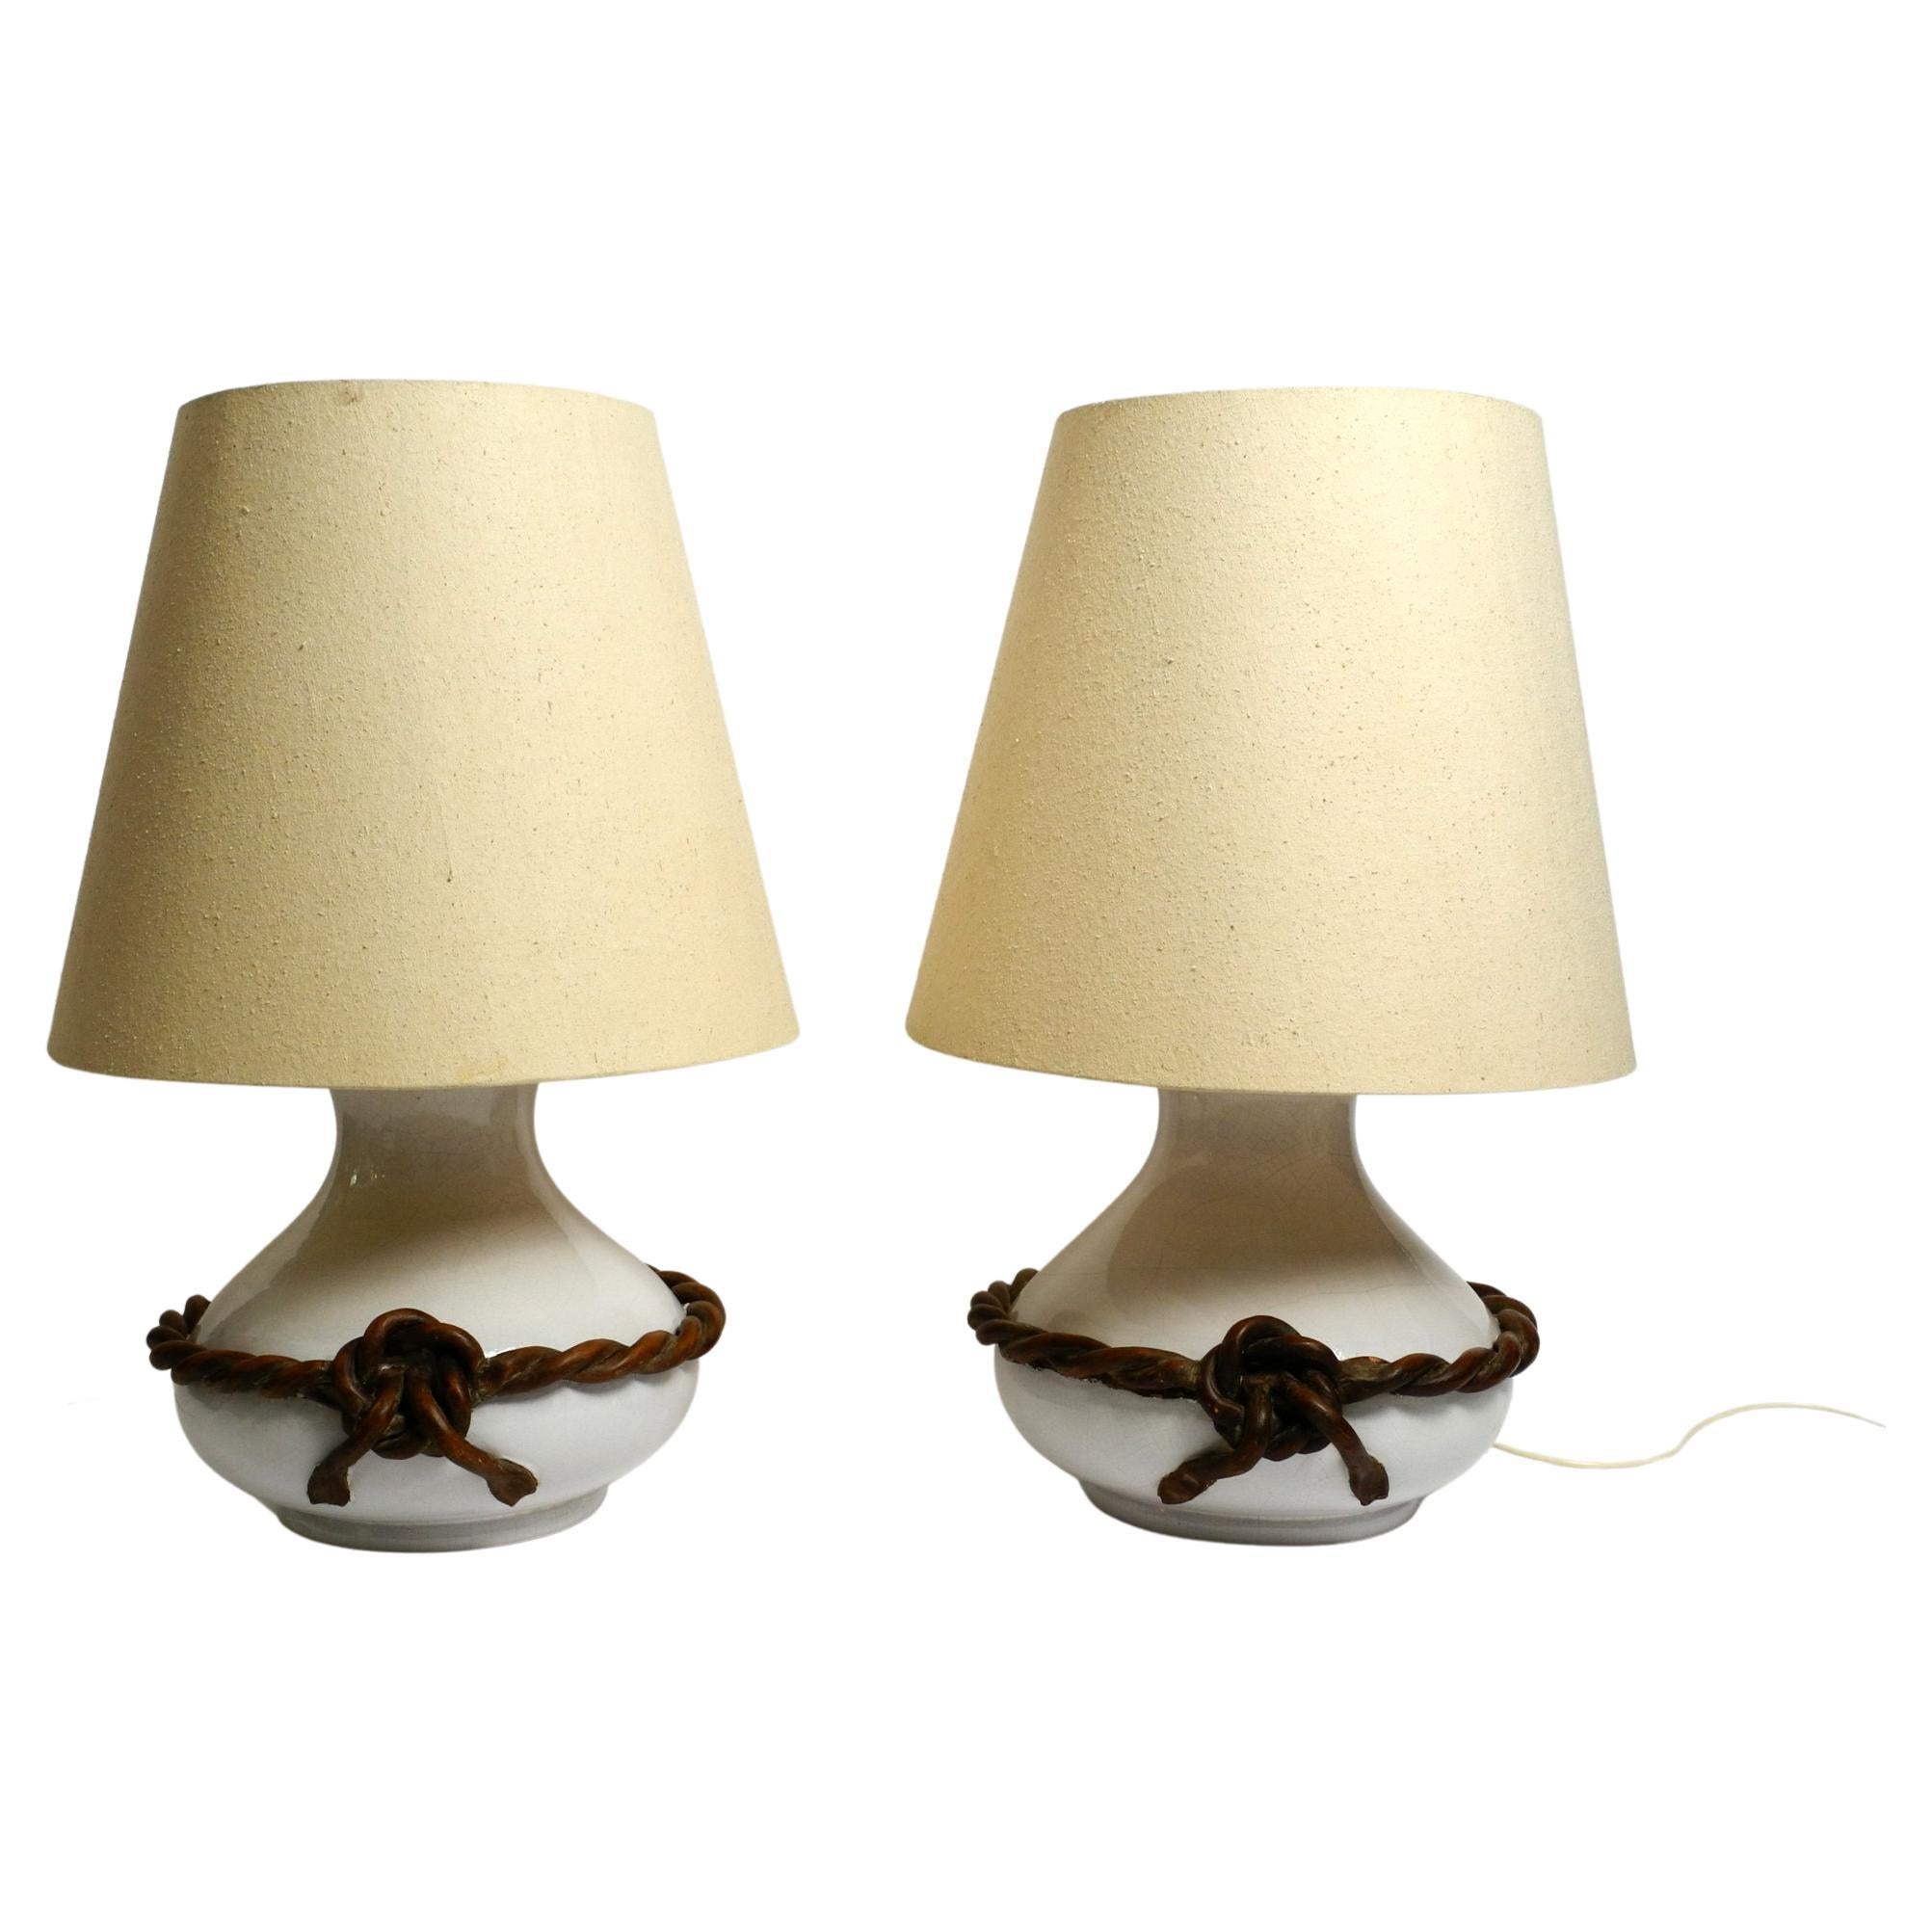 Two Beautiful Giant Italian Mid Century White Ceramic Table Lamps For Sale